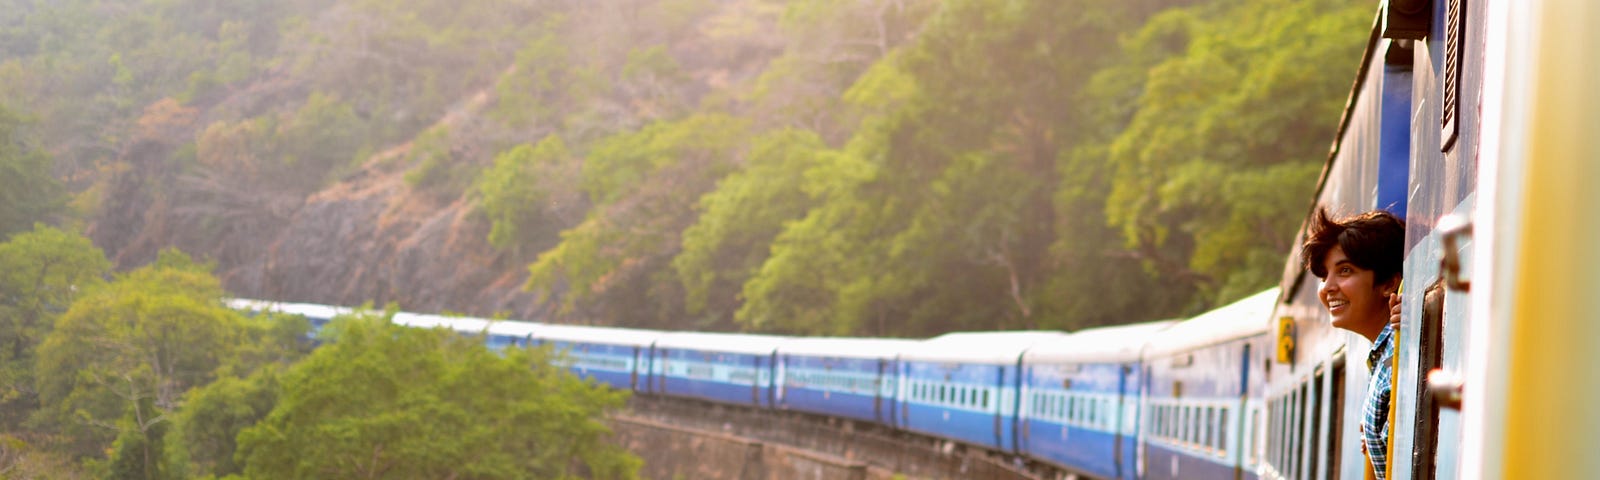 10 Compelling Reasons to Choose the Train for Your Next Adventure